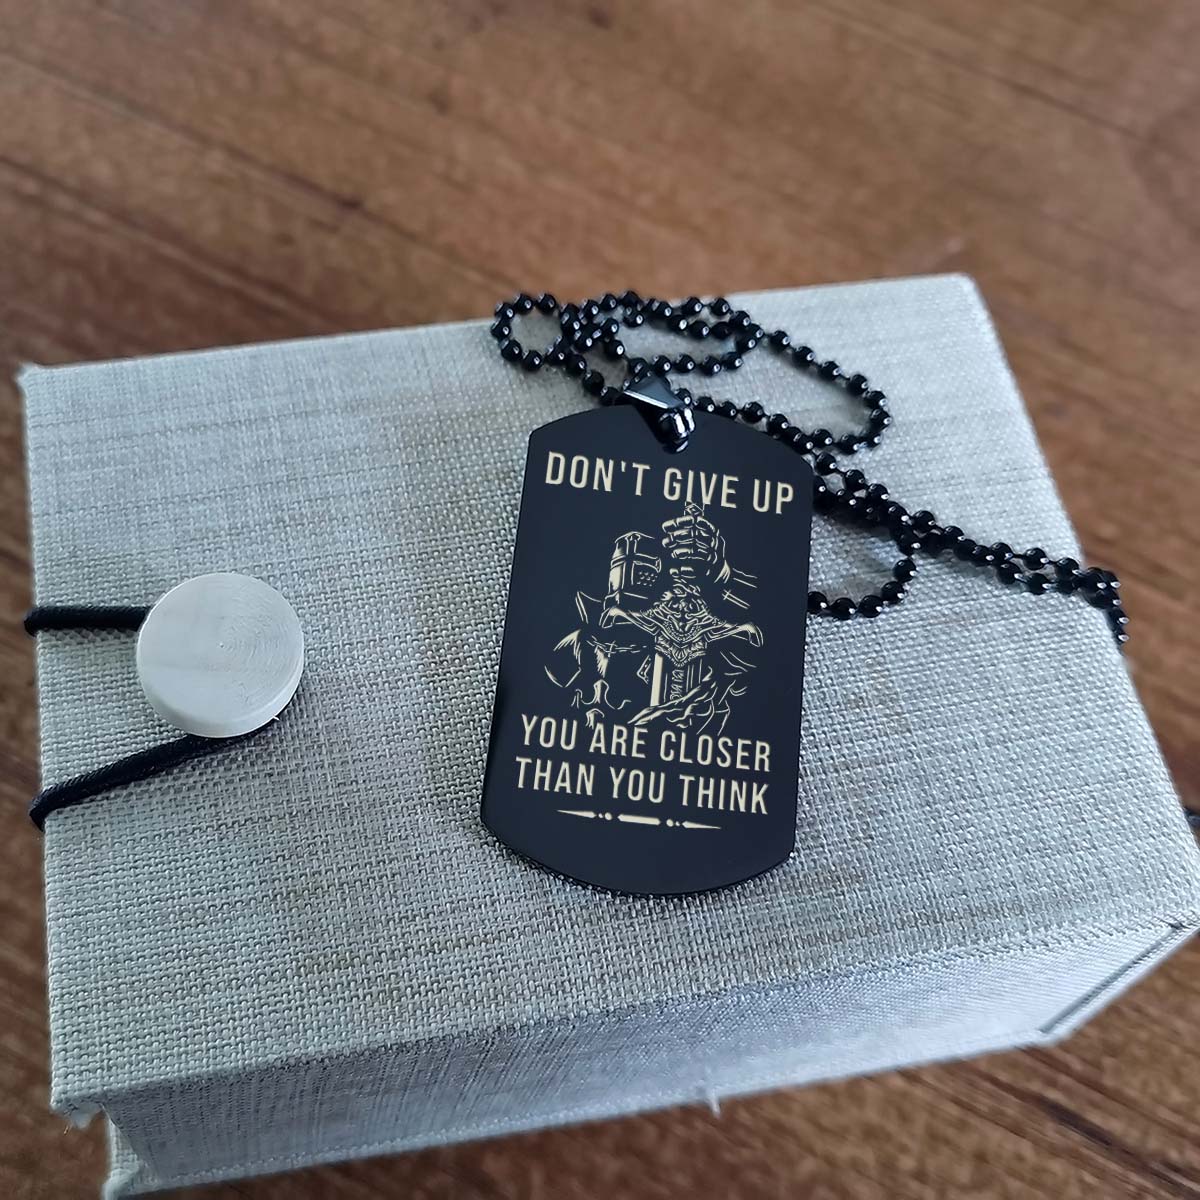 KTD036 - Don't Give Up - It's About Being Better Than You Were The Day Before - Knights Templar - Black Double-Sided Dog Tag